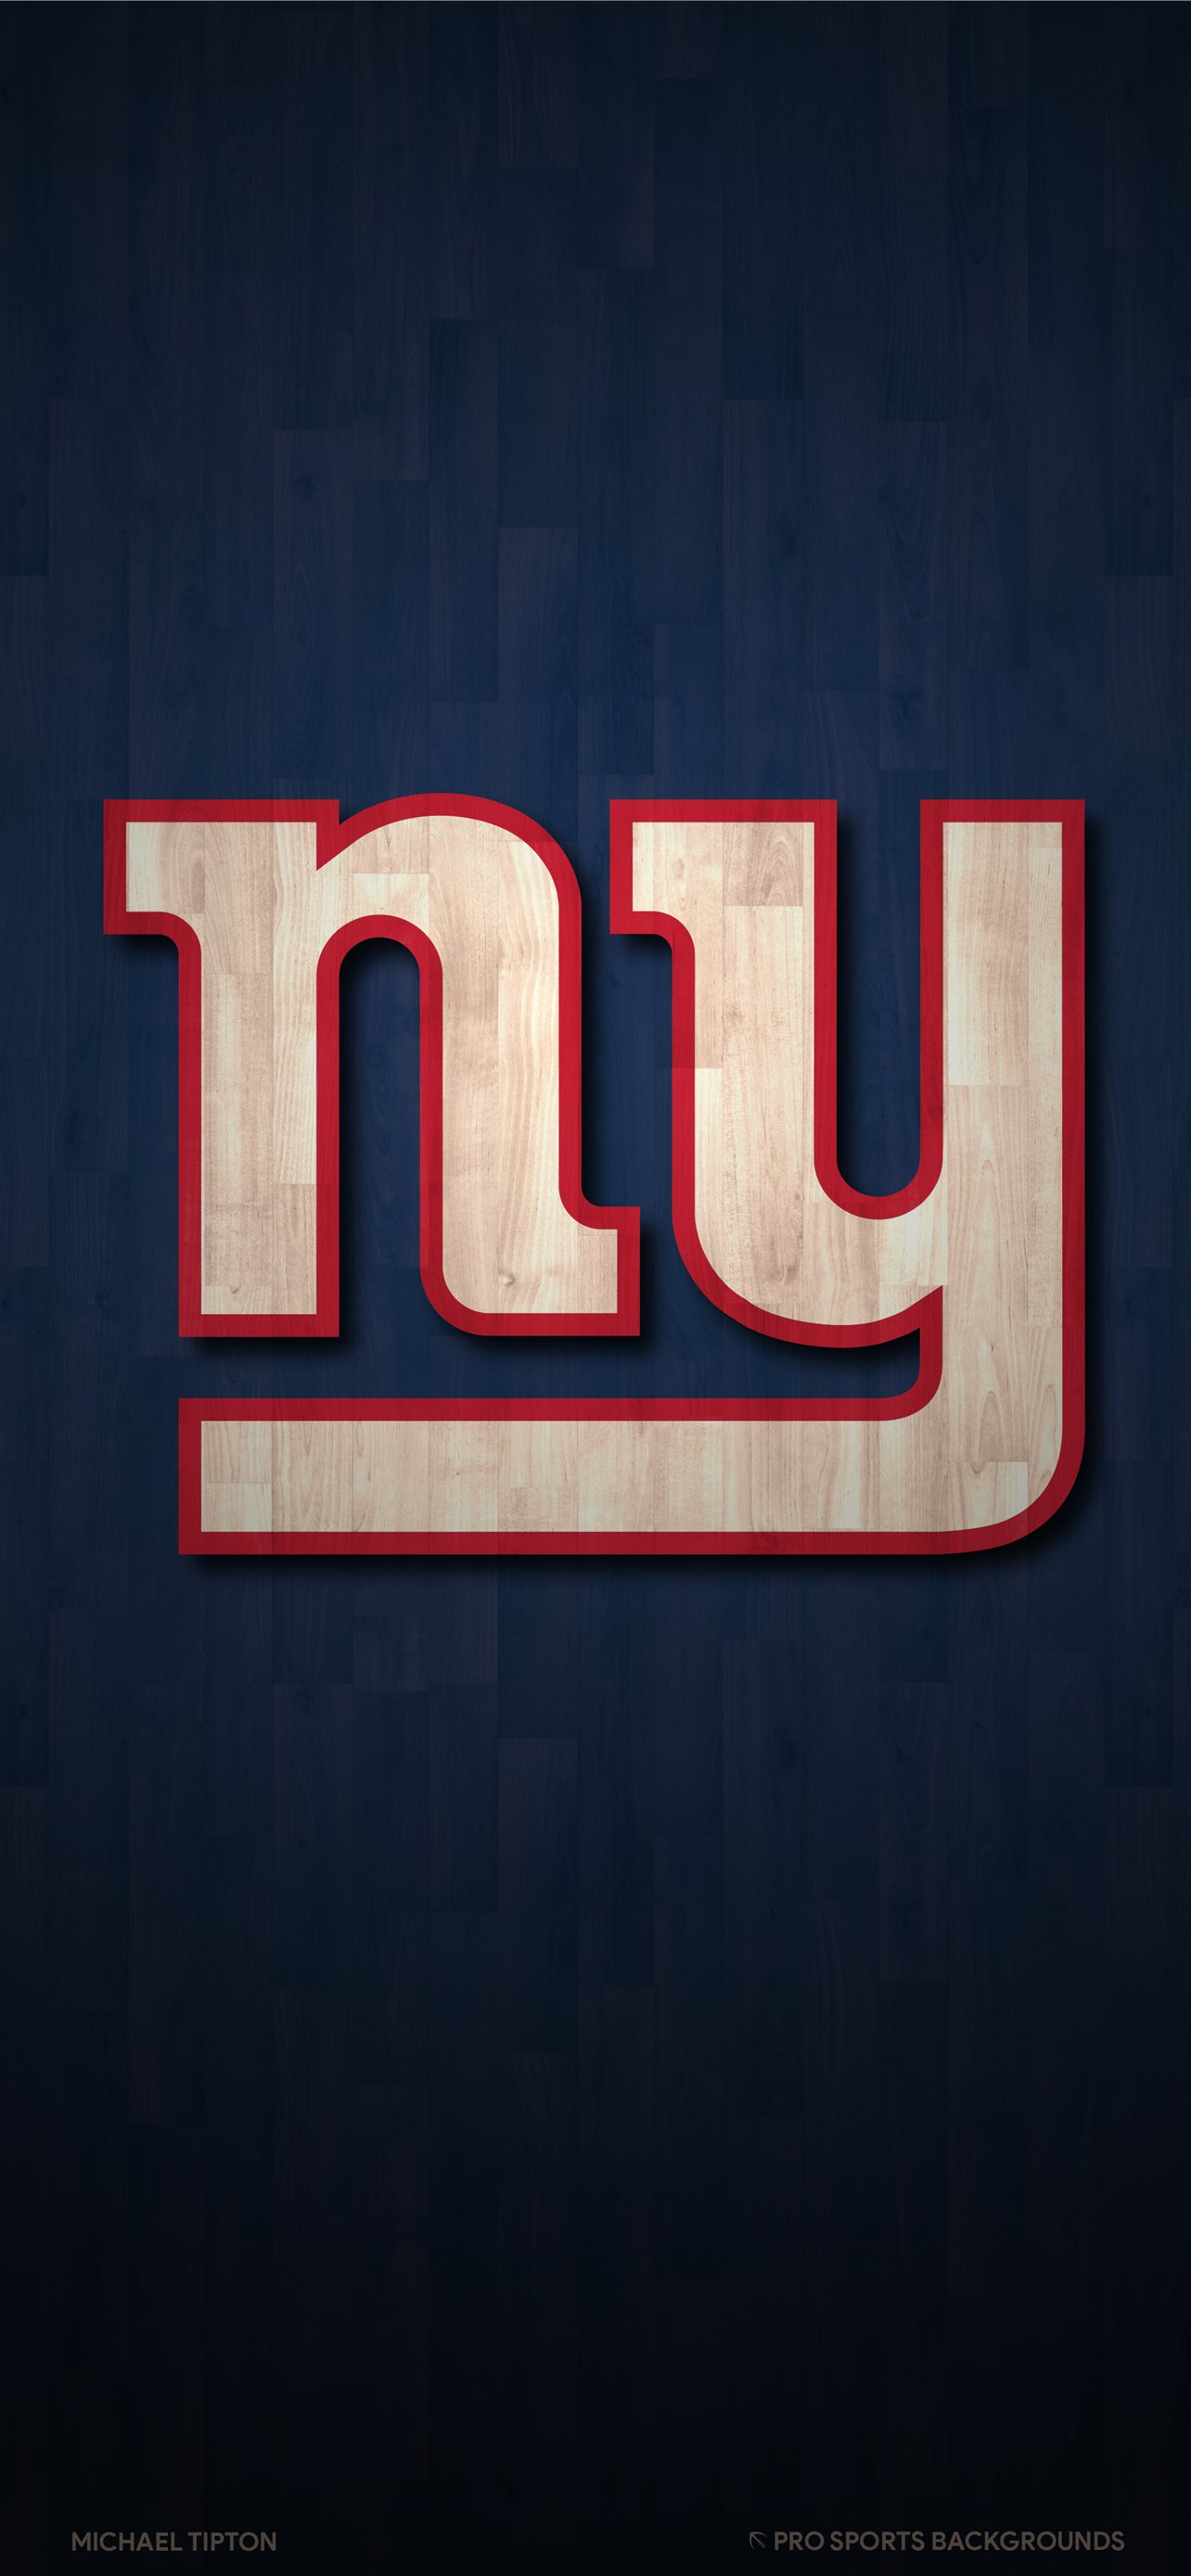 21 New York Giants Iphone Wallpapers Free Download